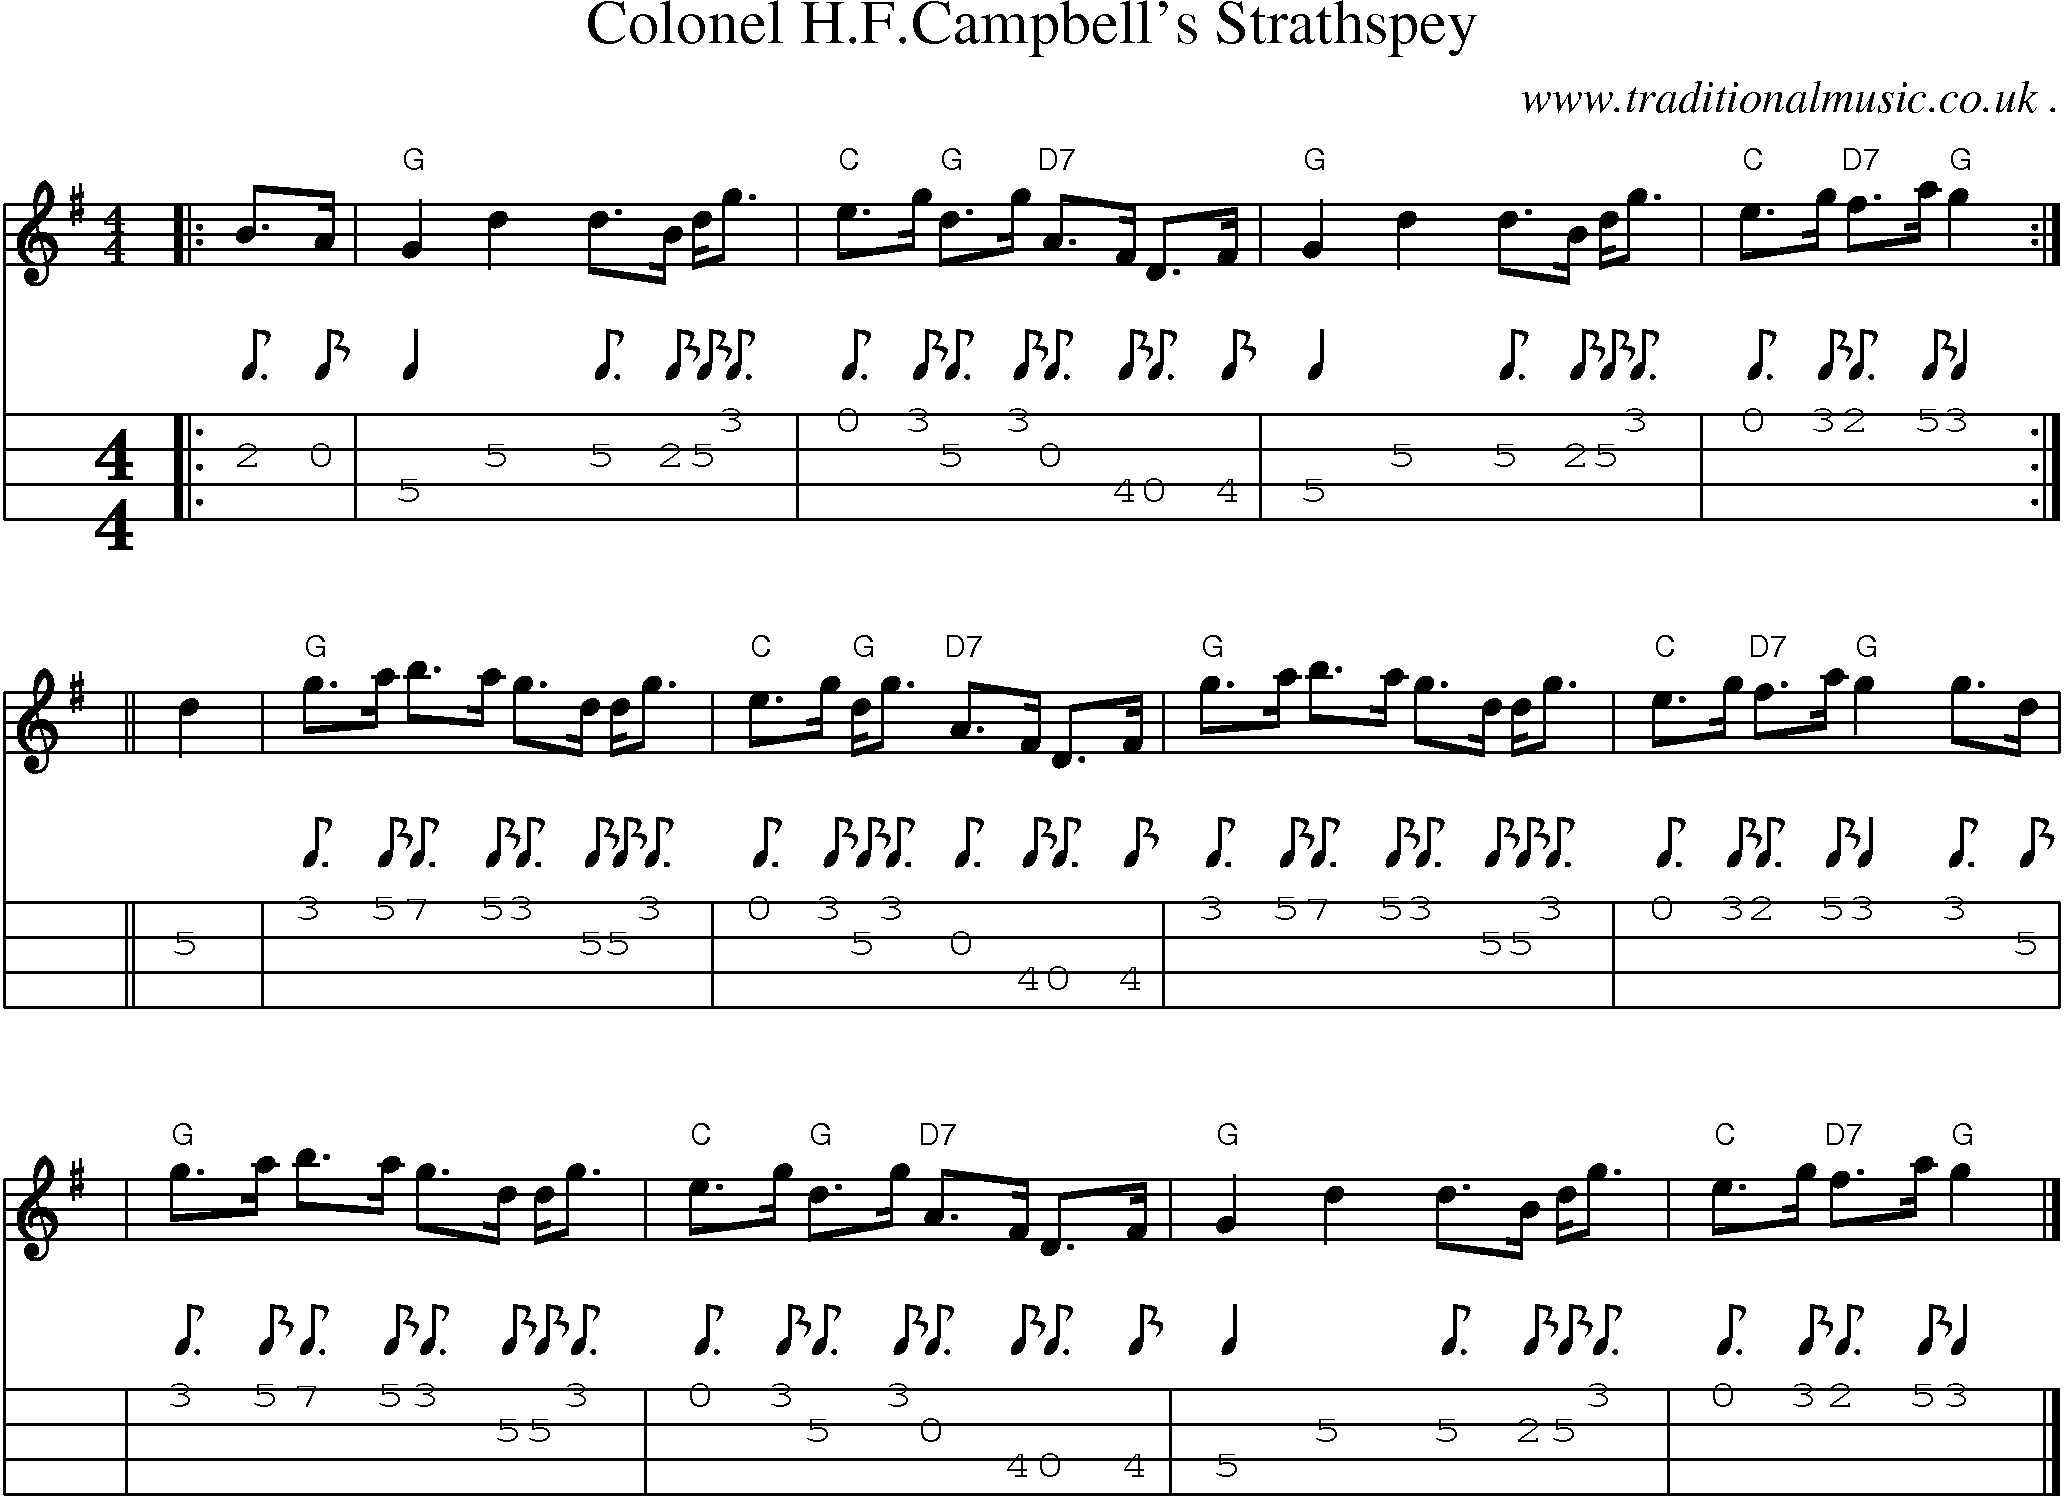 Sheet-music  score, Chords and Mandolin Tabs for Colonel Hfcampbells Strathspey